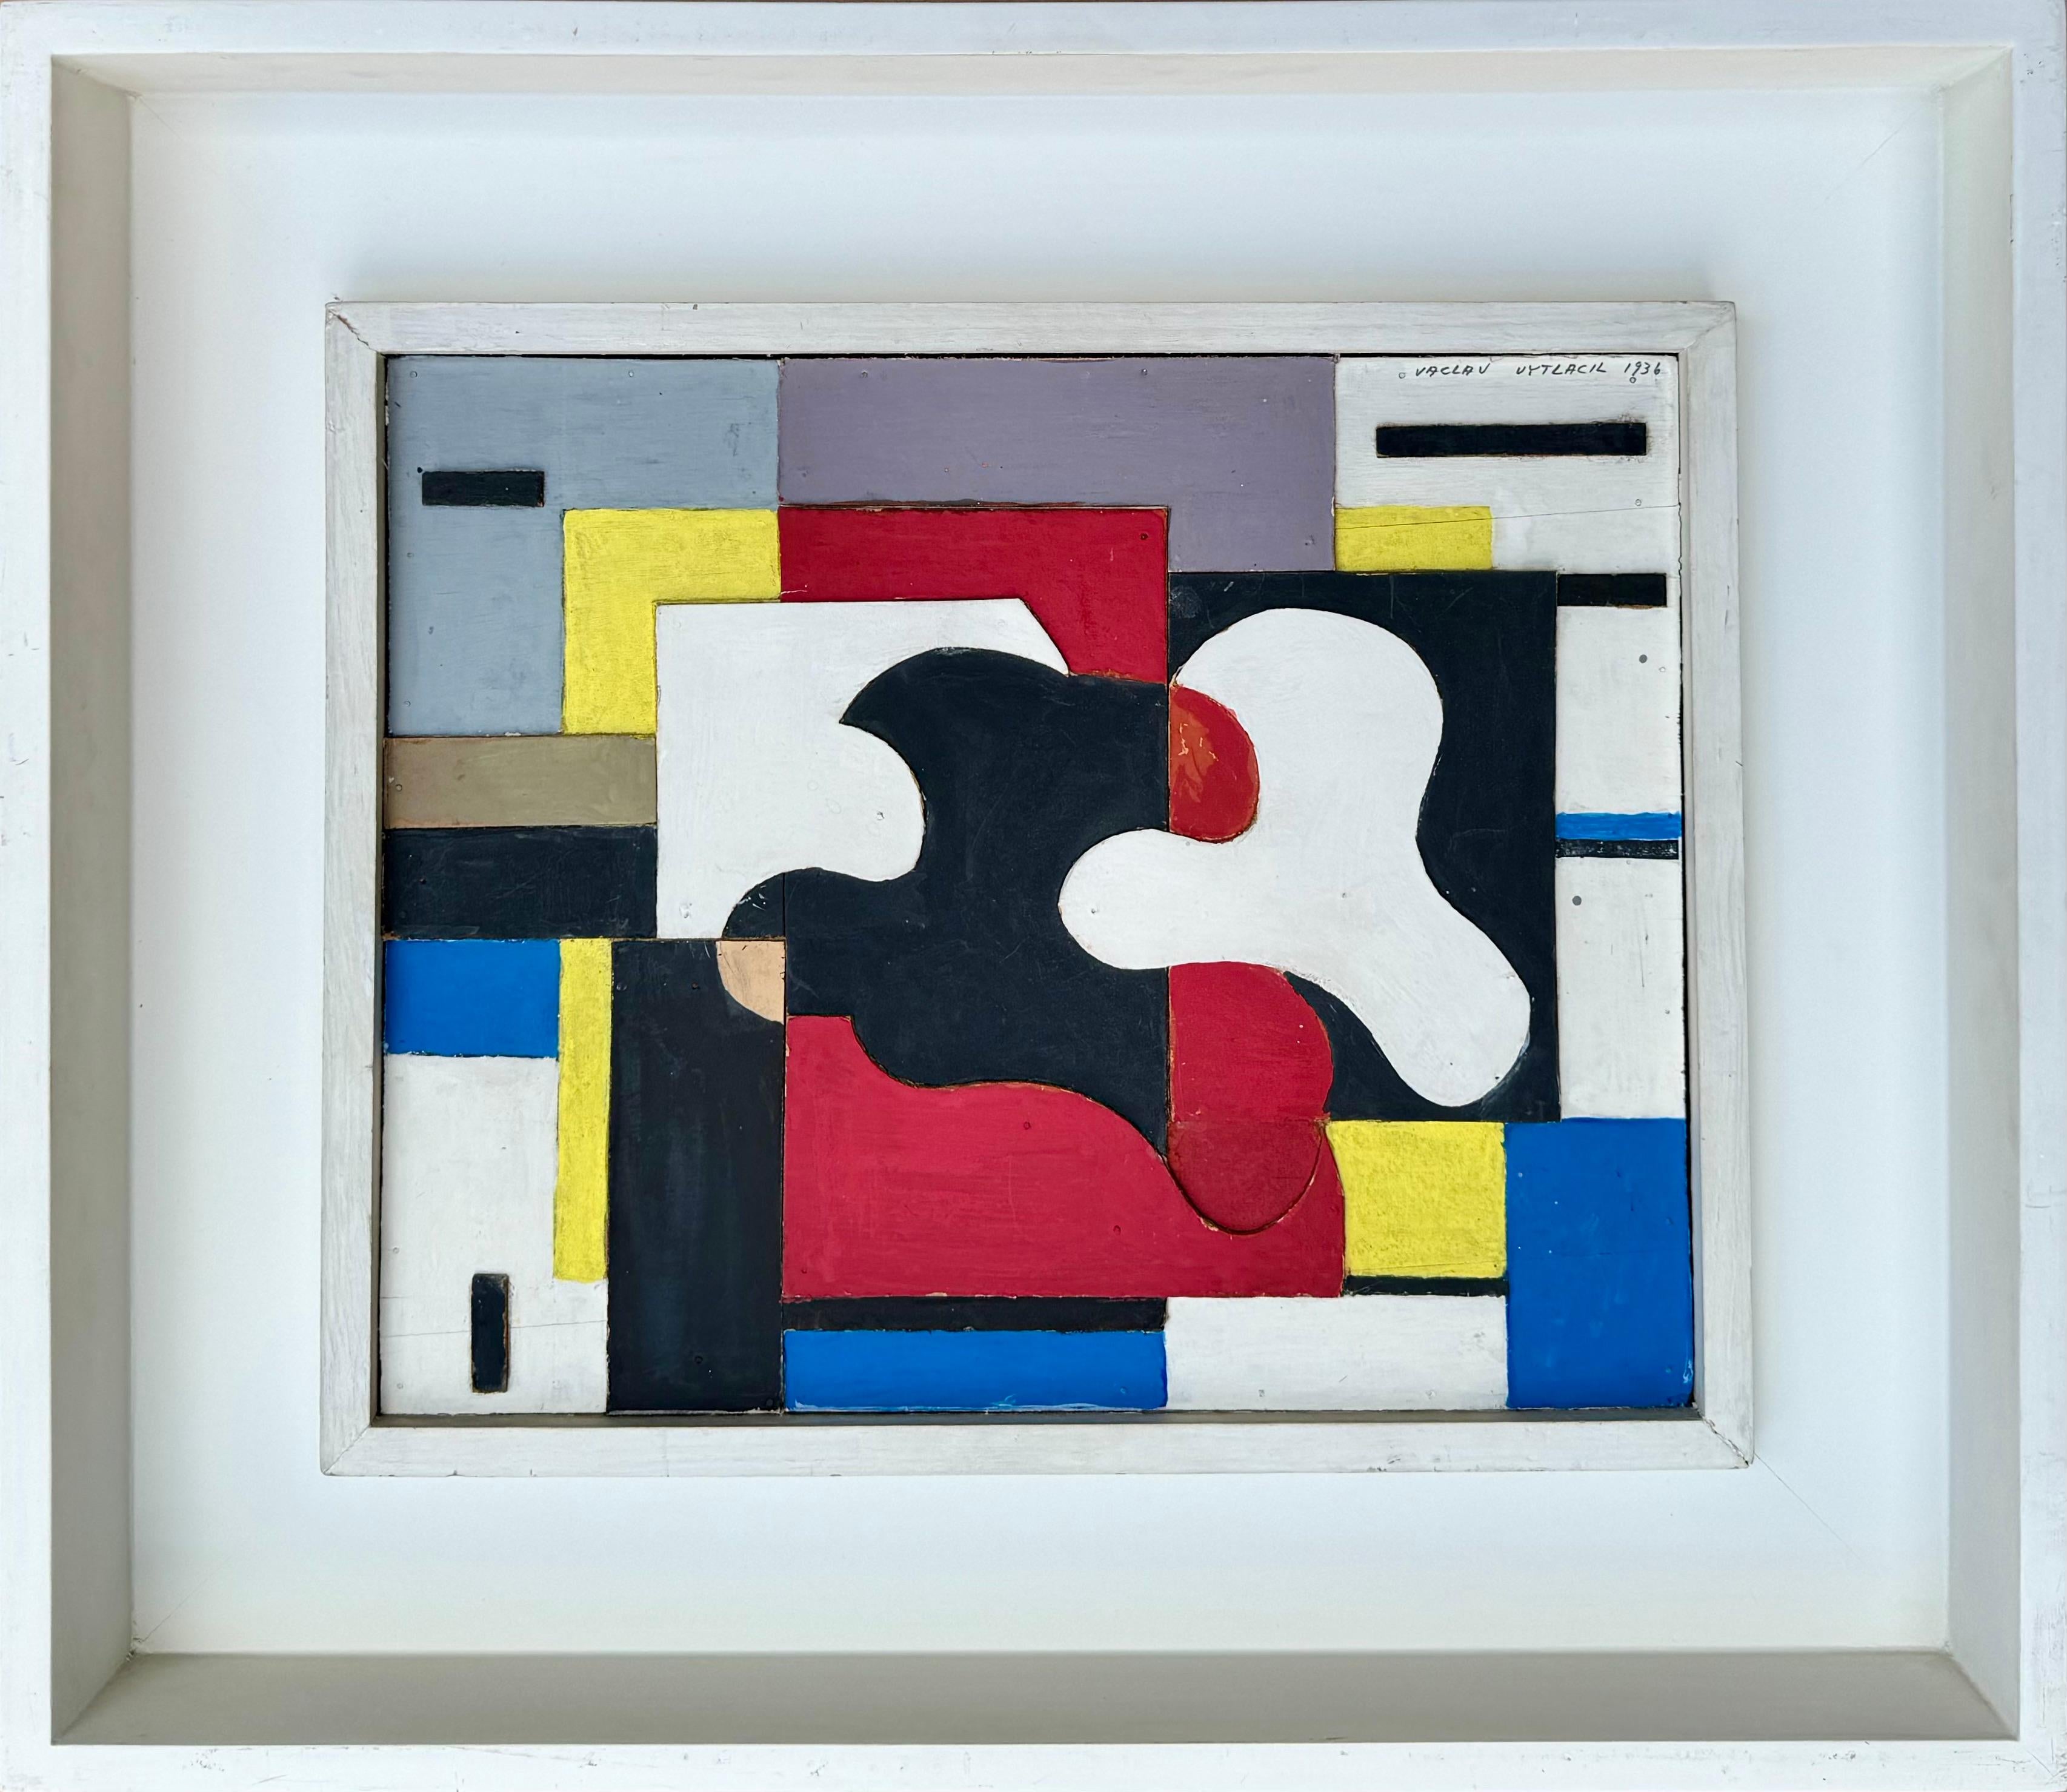 Abstract Cubist Construction Collage Mid 20th Century American Modernism Cubism - Mixed Media Art by Vaclav Vytlacil